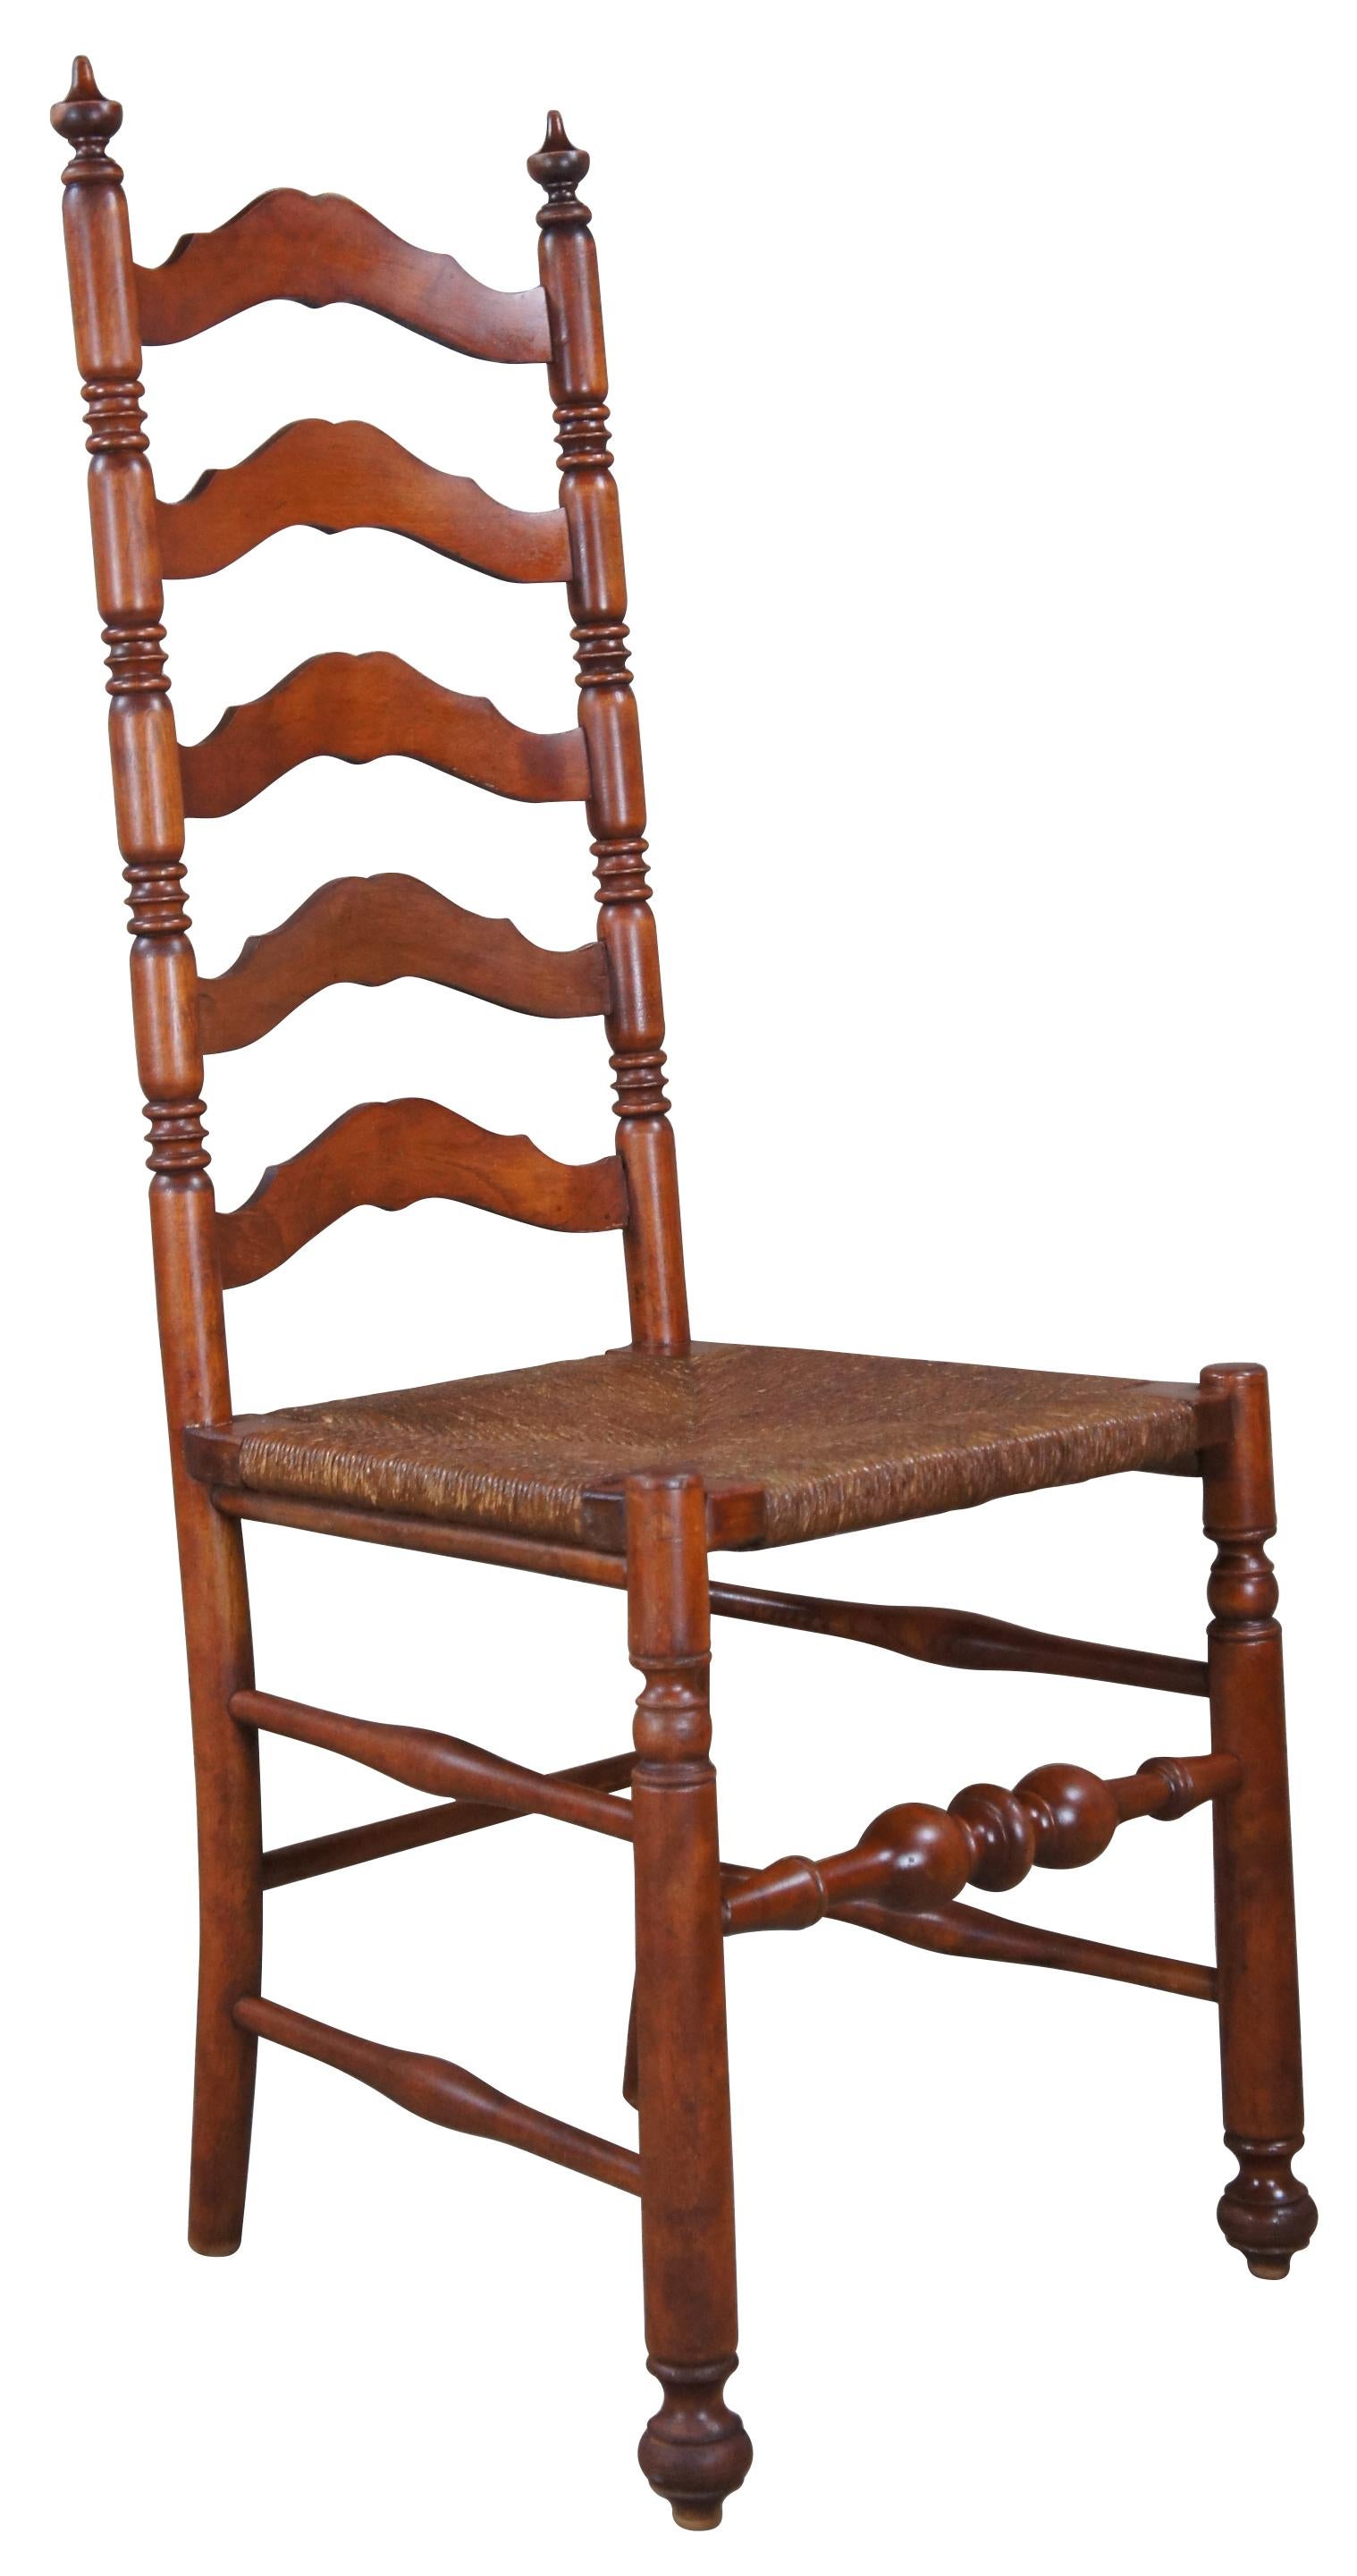 A lovely early 20th century shaker side chair. Made from oak with a serpentine ladder back. Features ripped stiles, spire finials and a rush seat. Legs are turned with shapely stretchers.